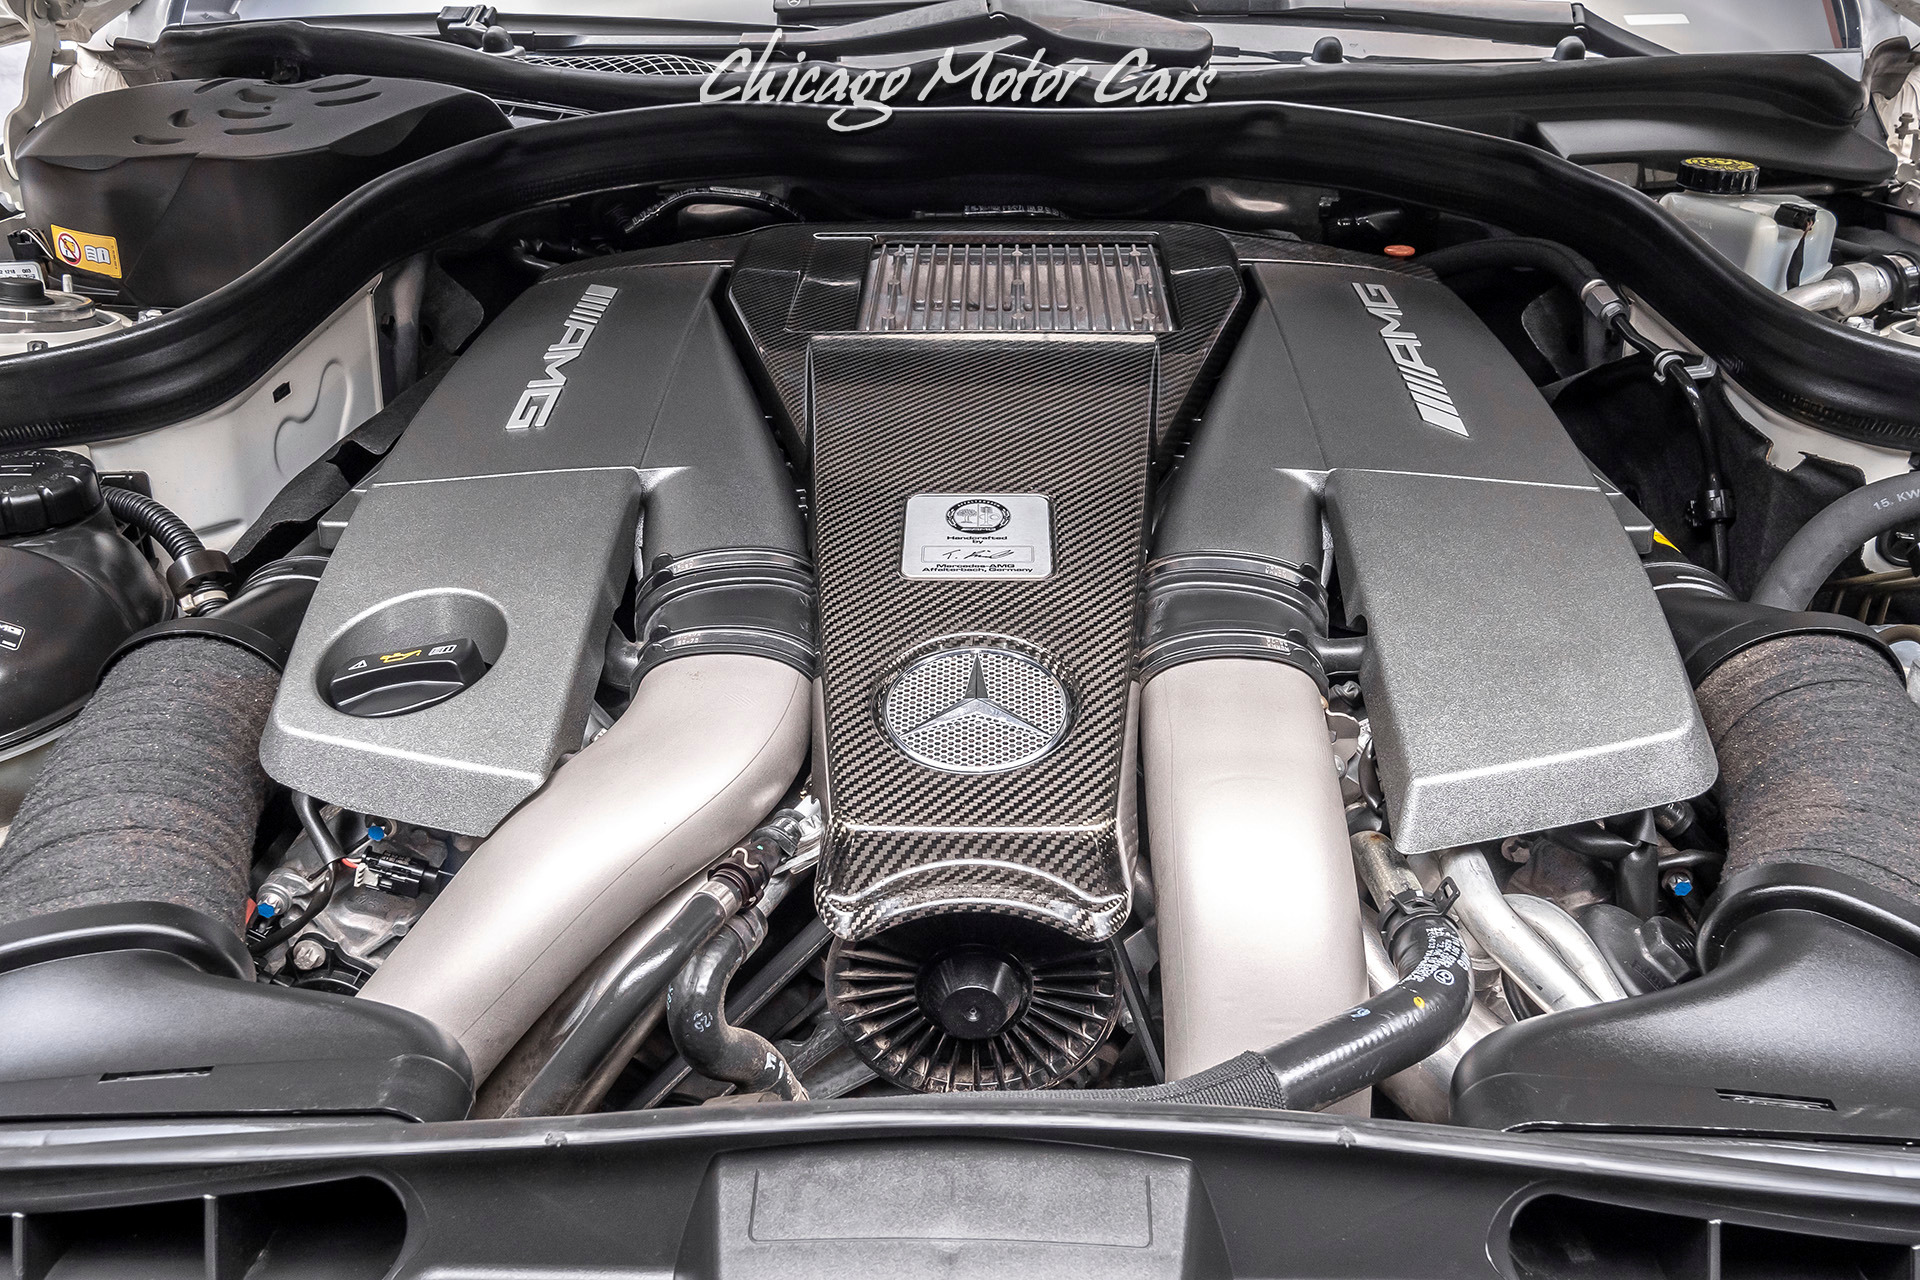 Used-2013-Mercedes-Benz-E63-AMG-Wagon-Performance-Package-INTERIOR-PACKAGE